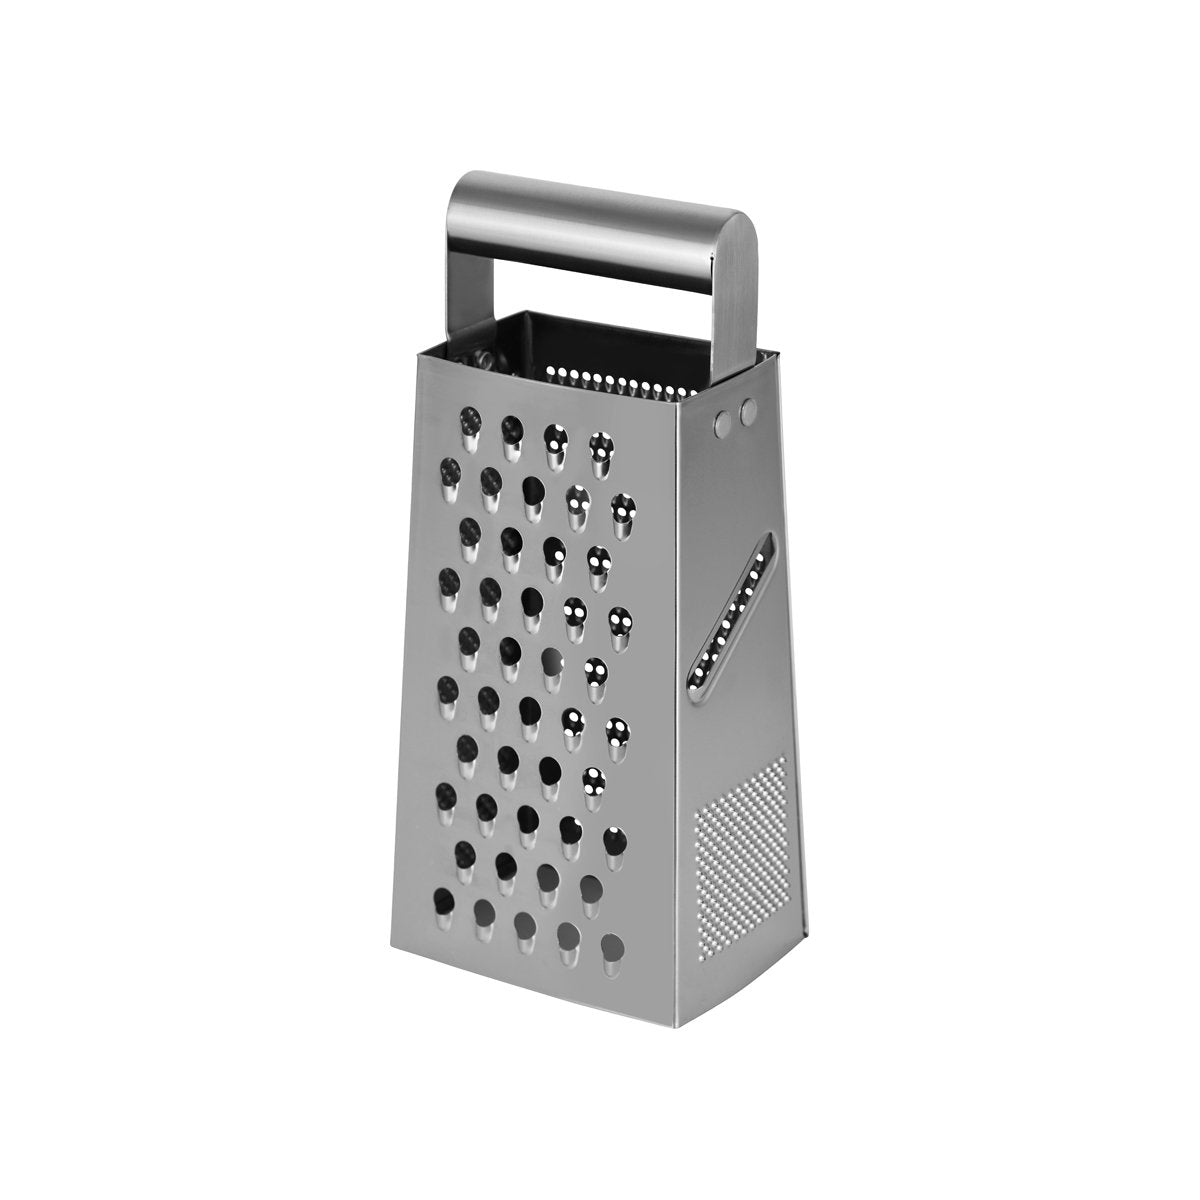 07345 Chef Inox Grater 4 Sided Tube Handle 185mm Tomkin Australia Hospitality Supplies